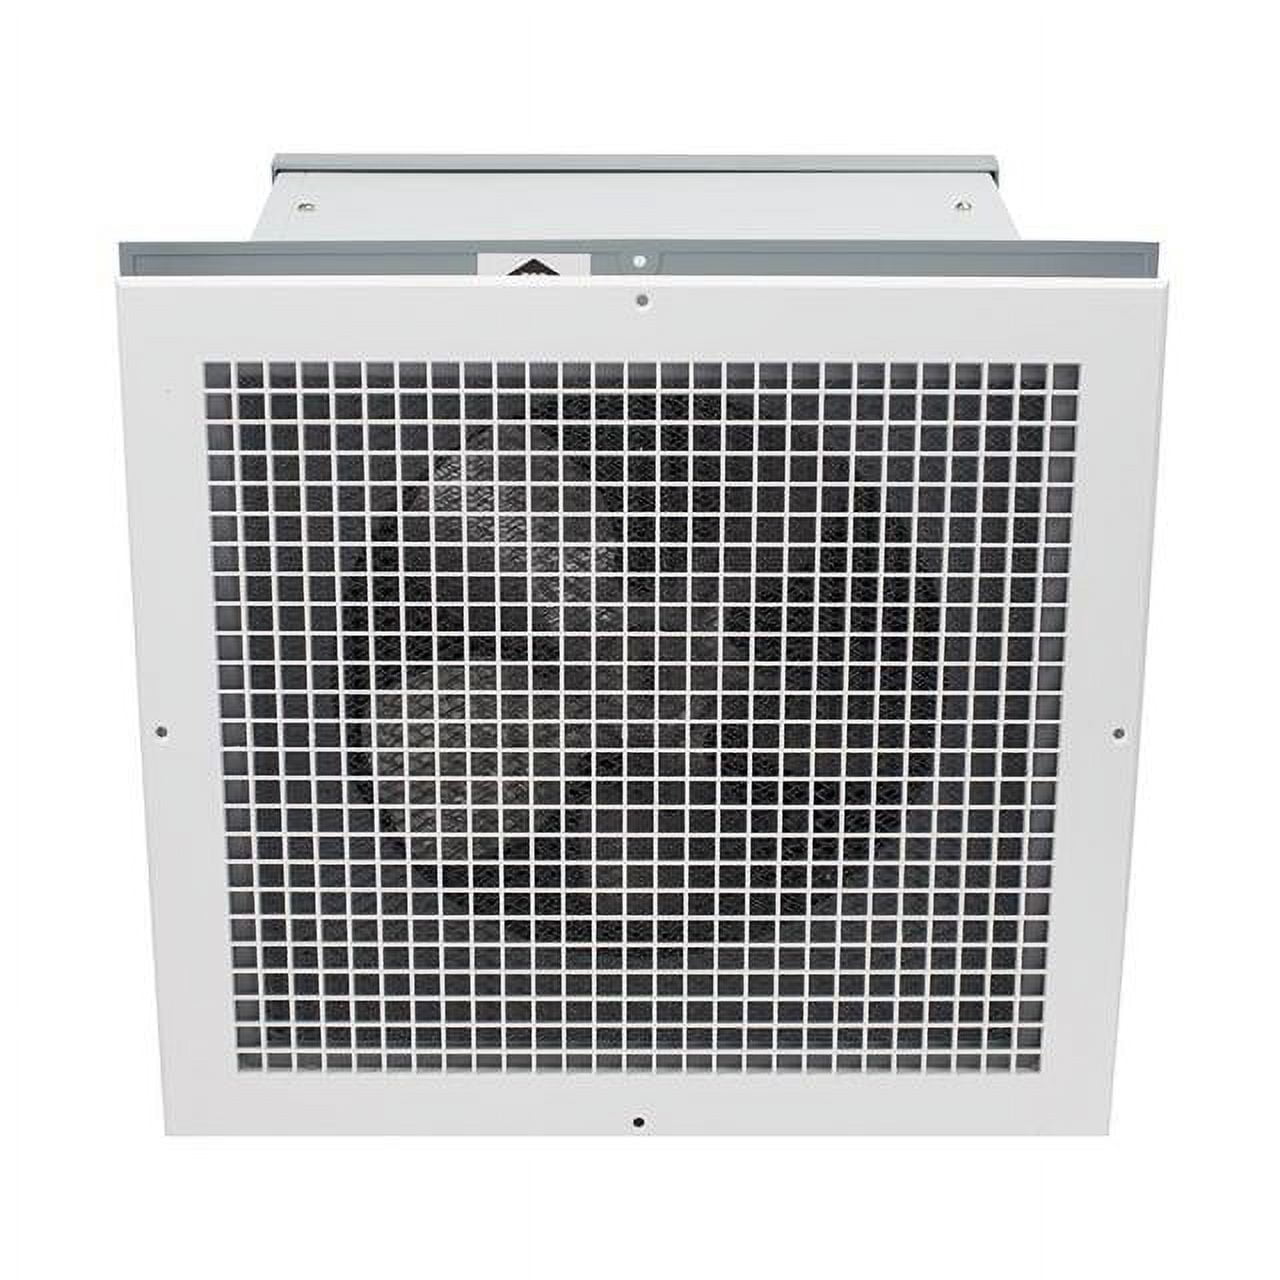 Whole-House Self-Contained Evaporative Humidifier - AprilAire 300